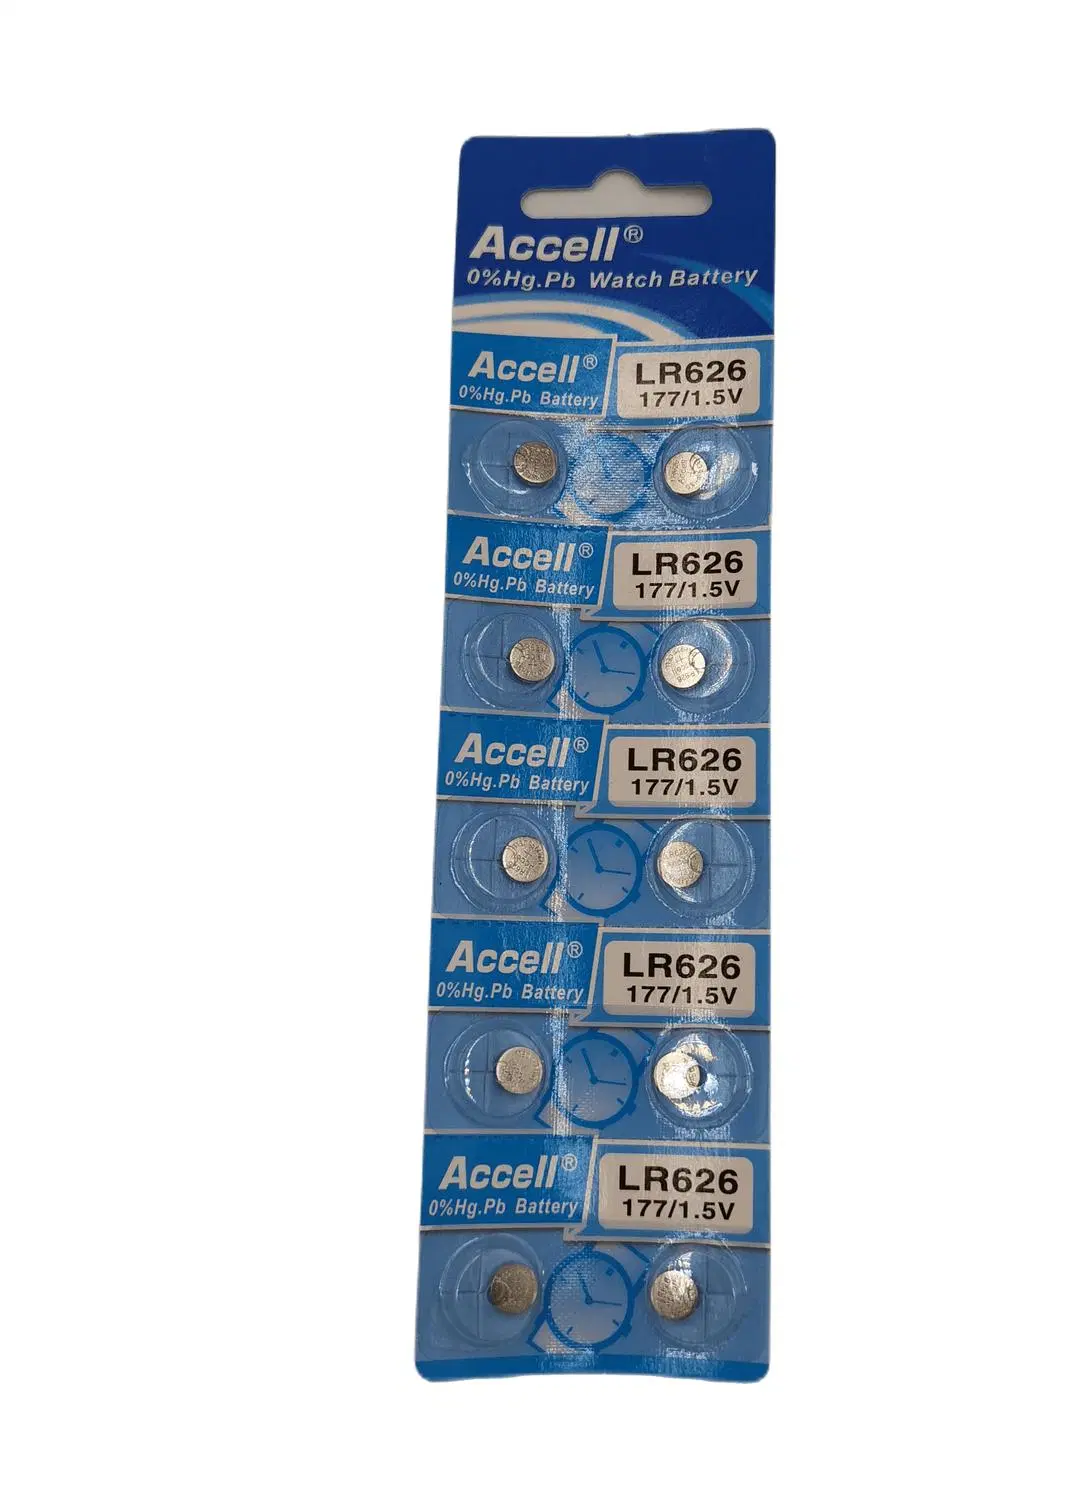 Accell Alkaline Button Battery AG4 1.5V for Toy Watch Battery